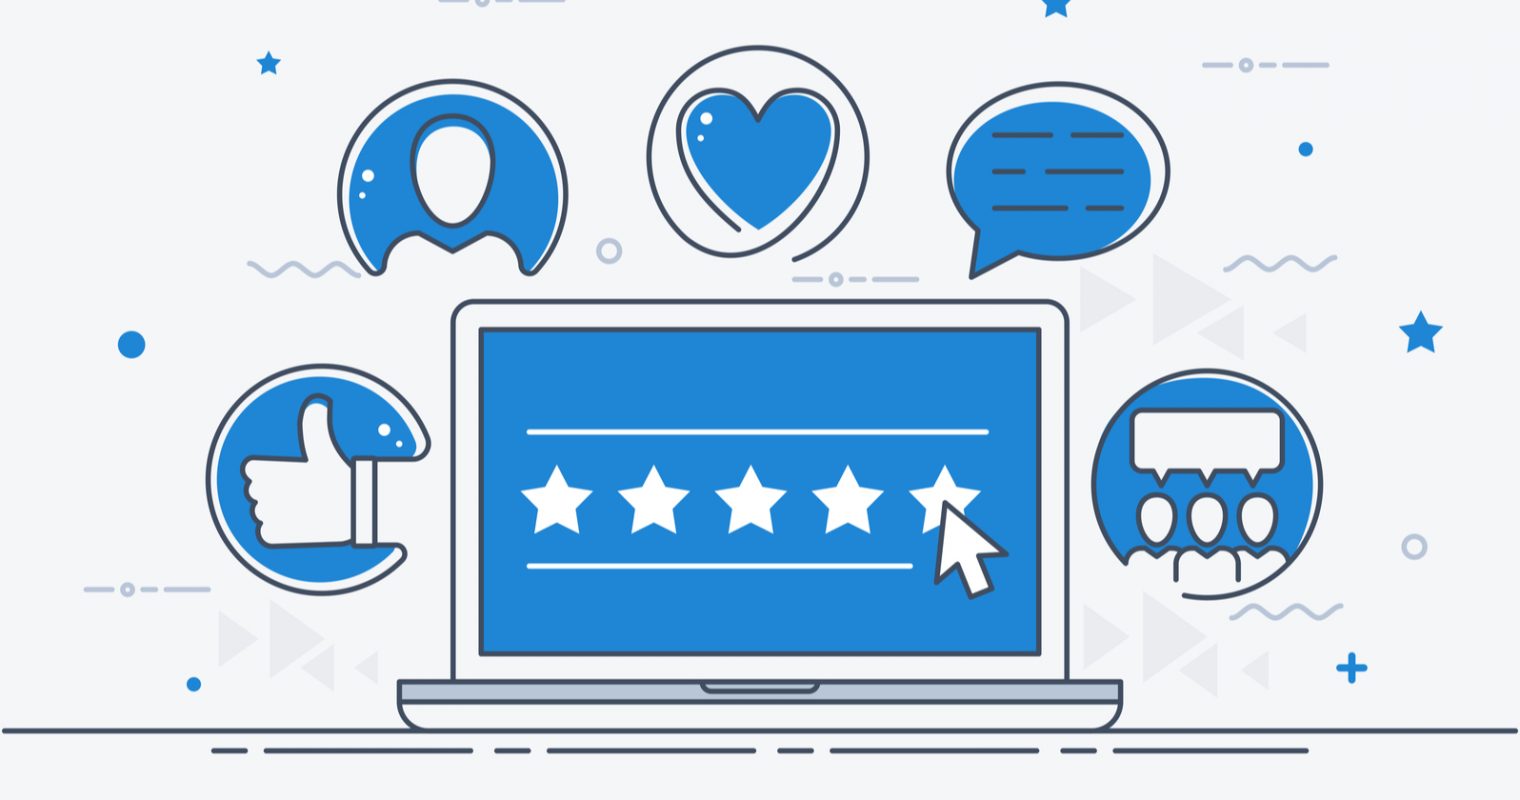 Top Practices to earn product reviews in 2020